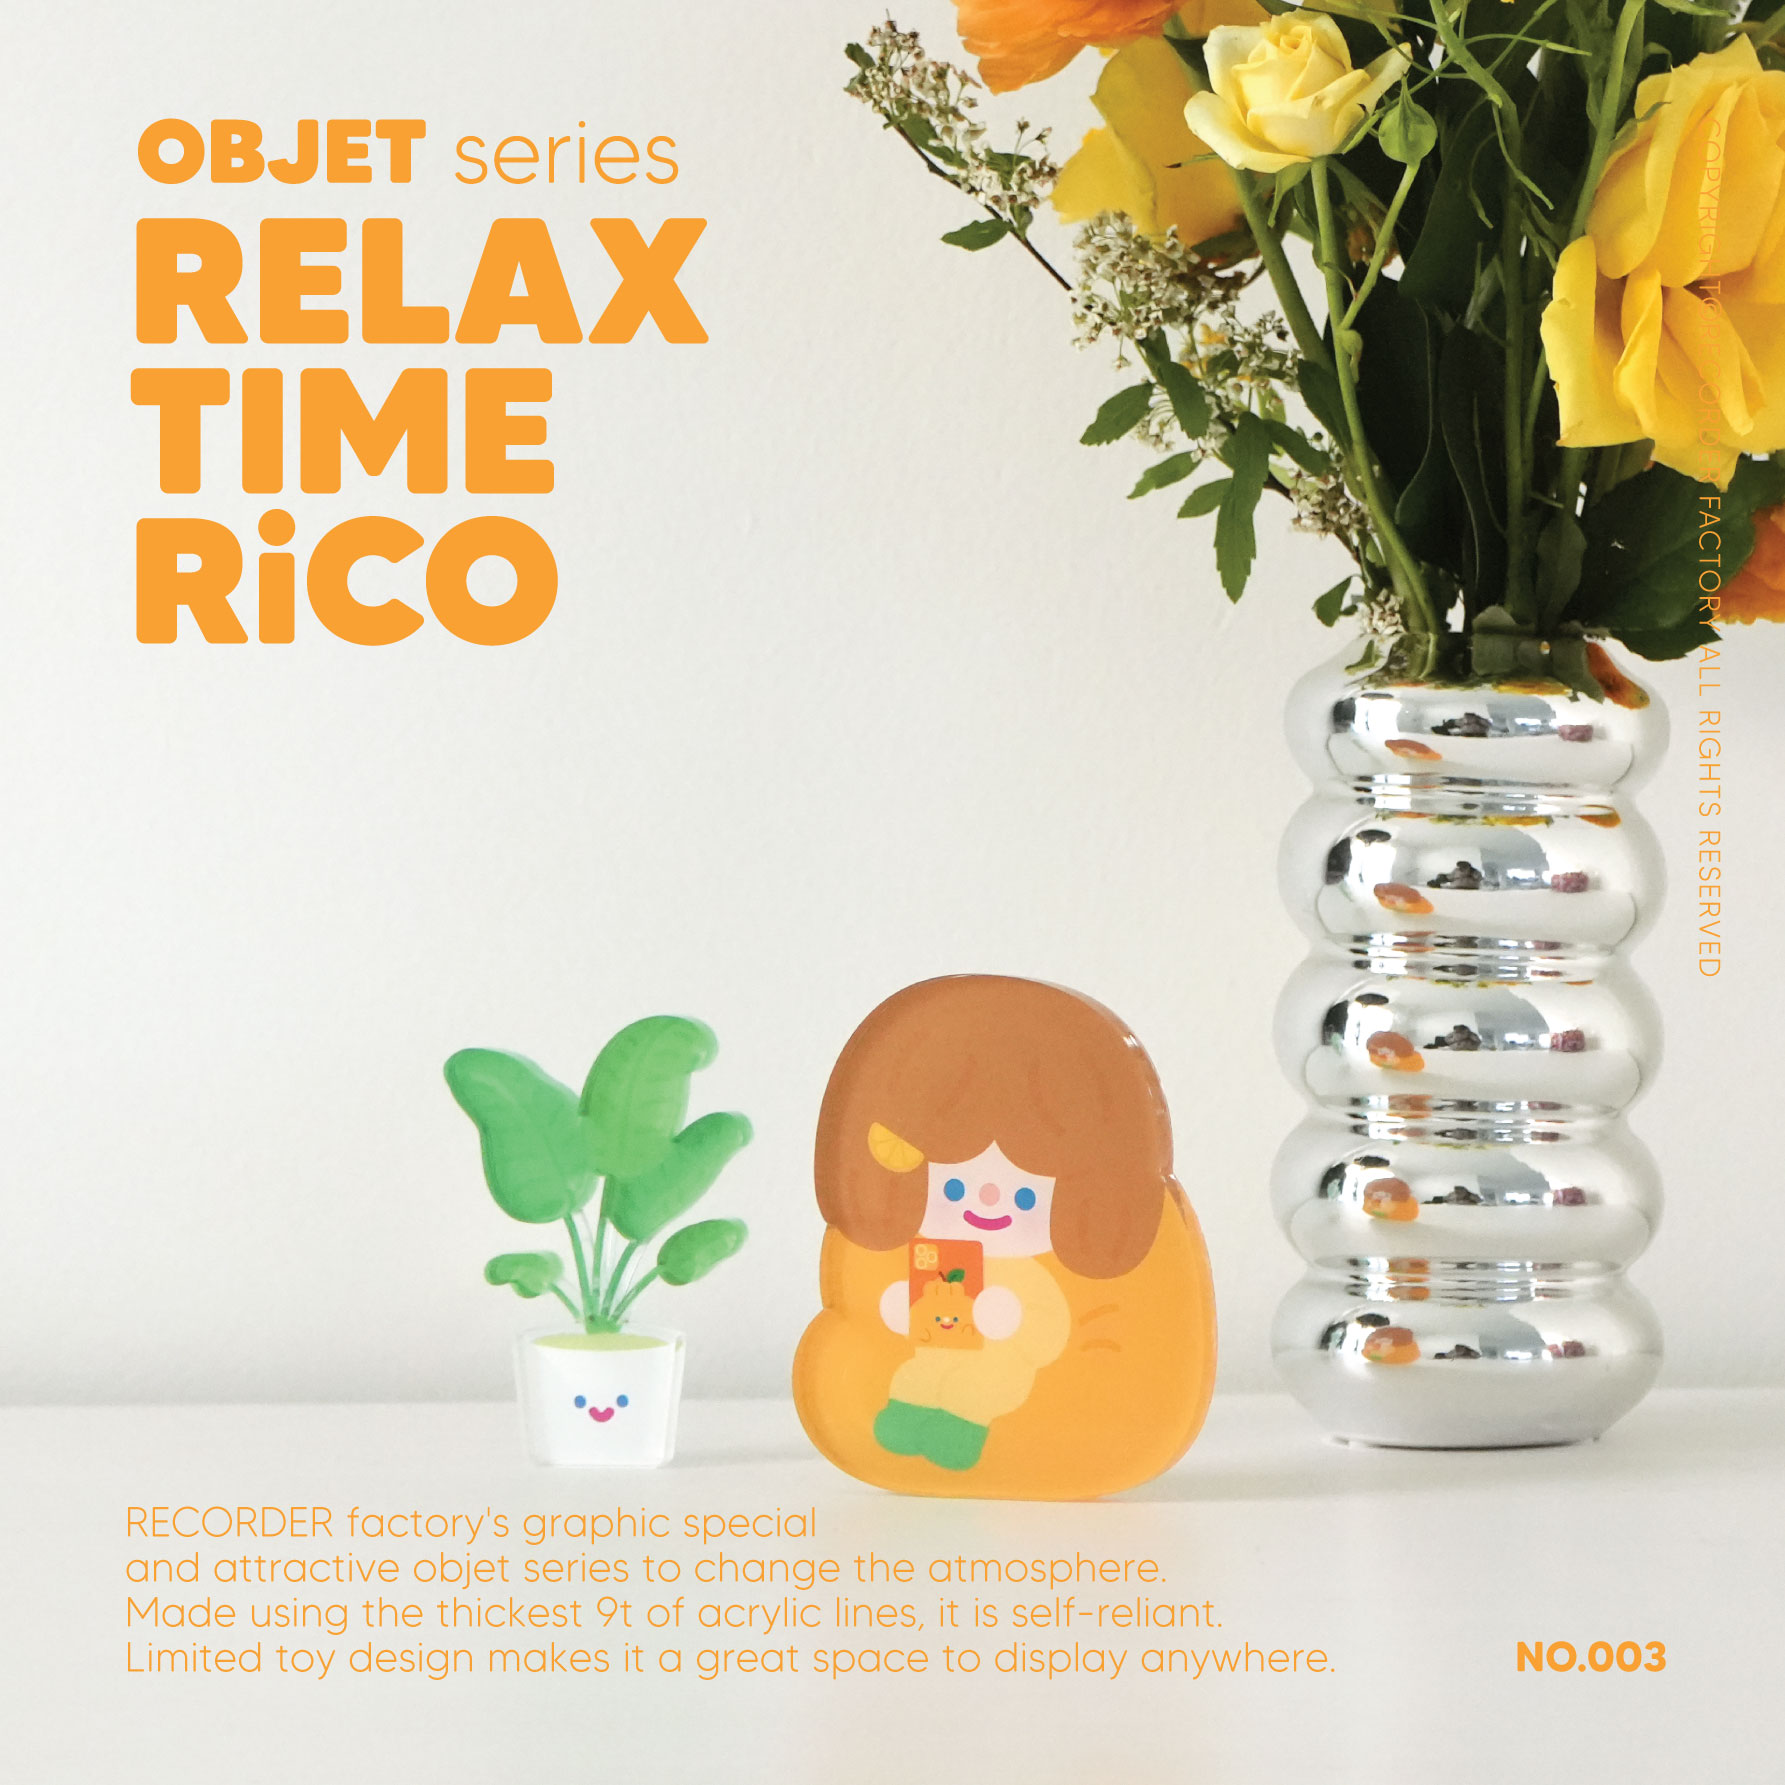 OBJET SERIES NO.003 HAPPY RELAX TIME RiCO